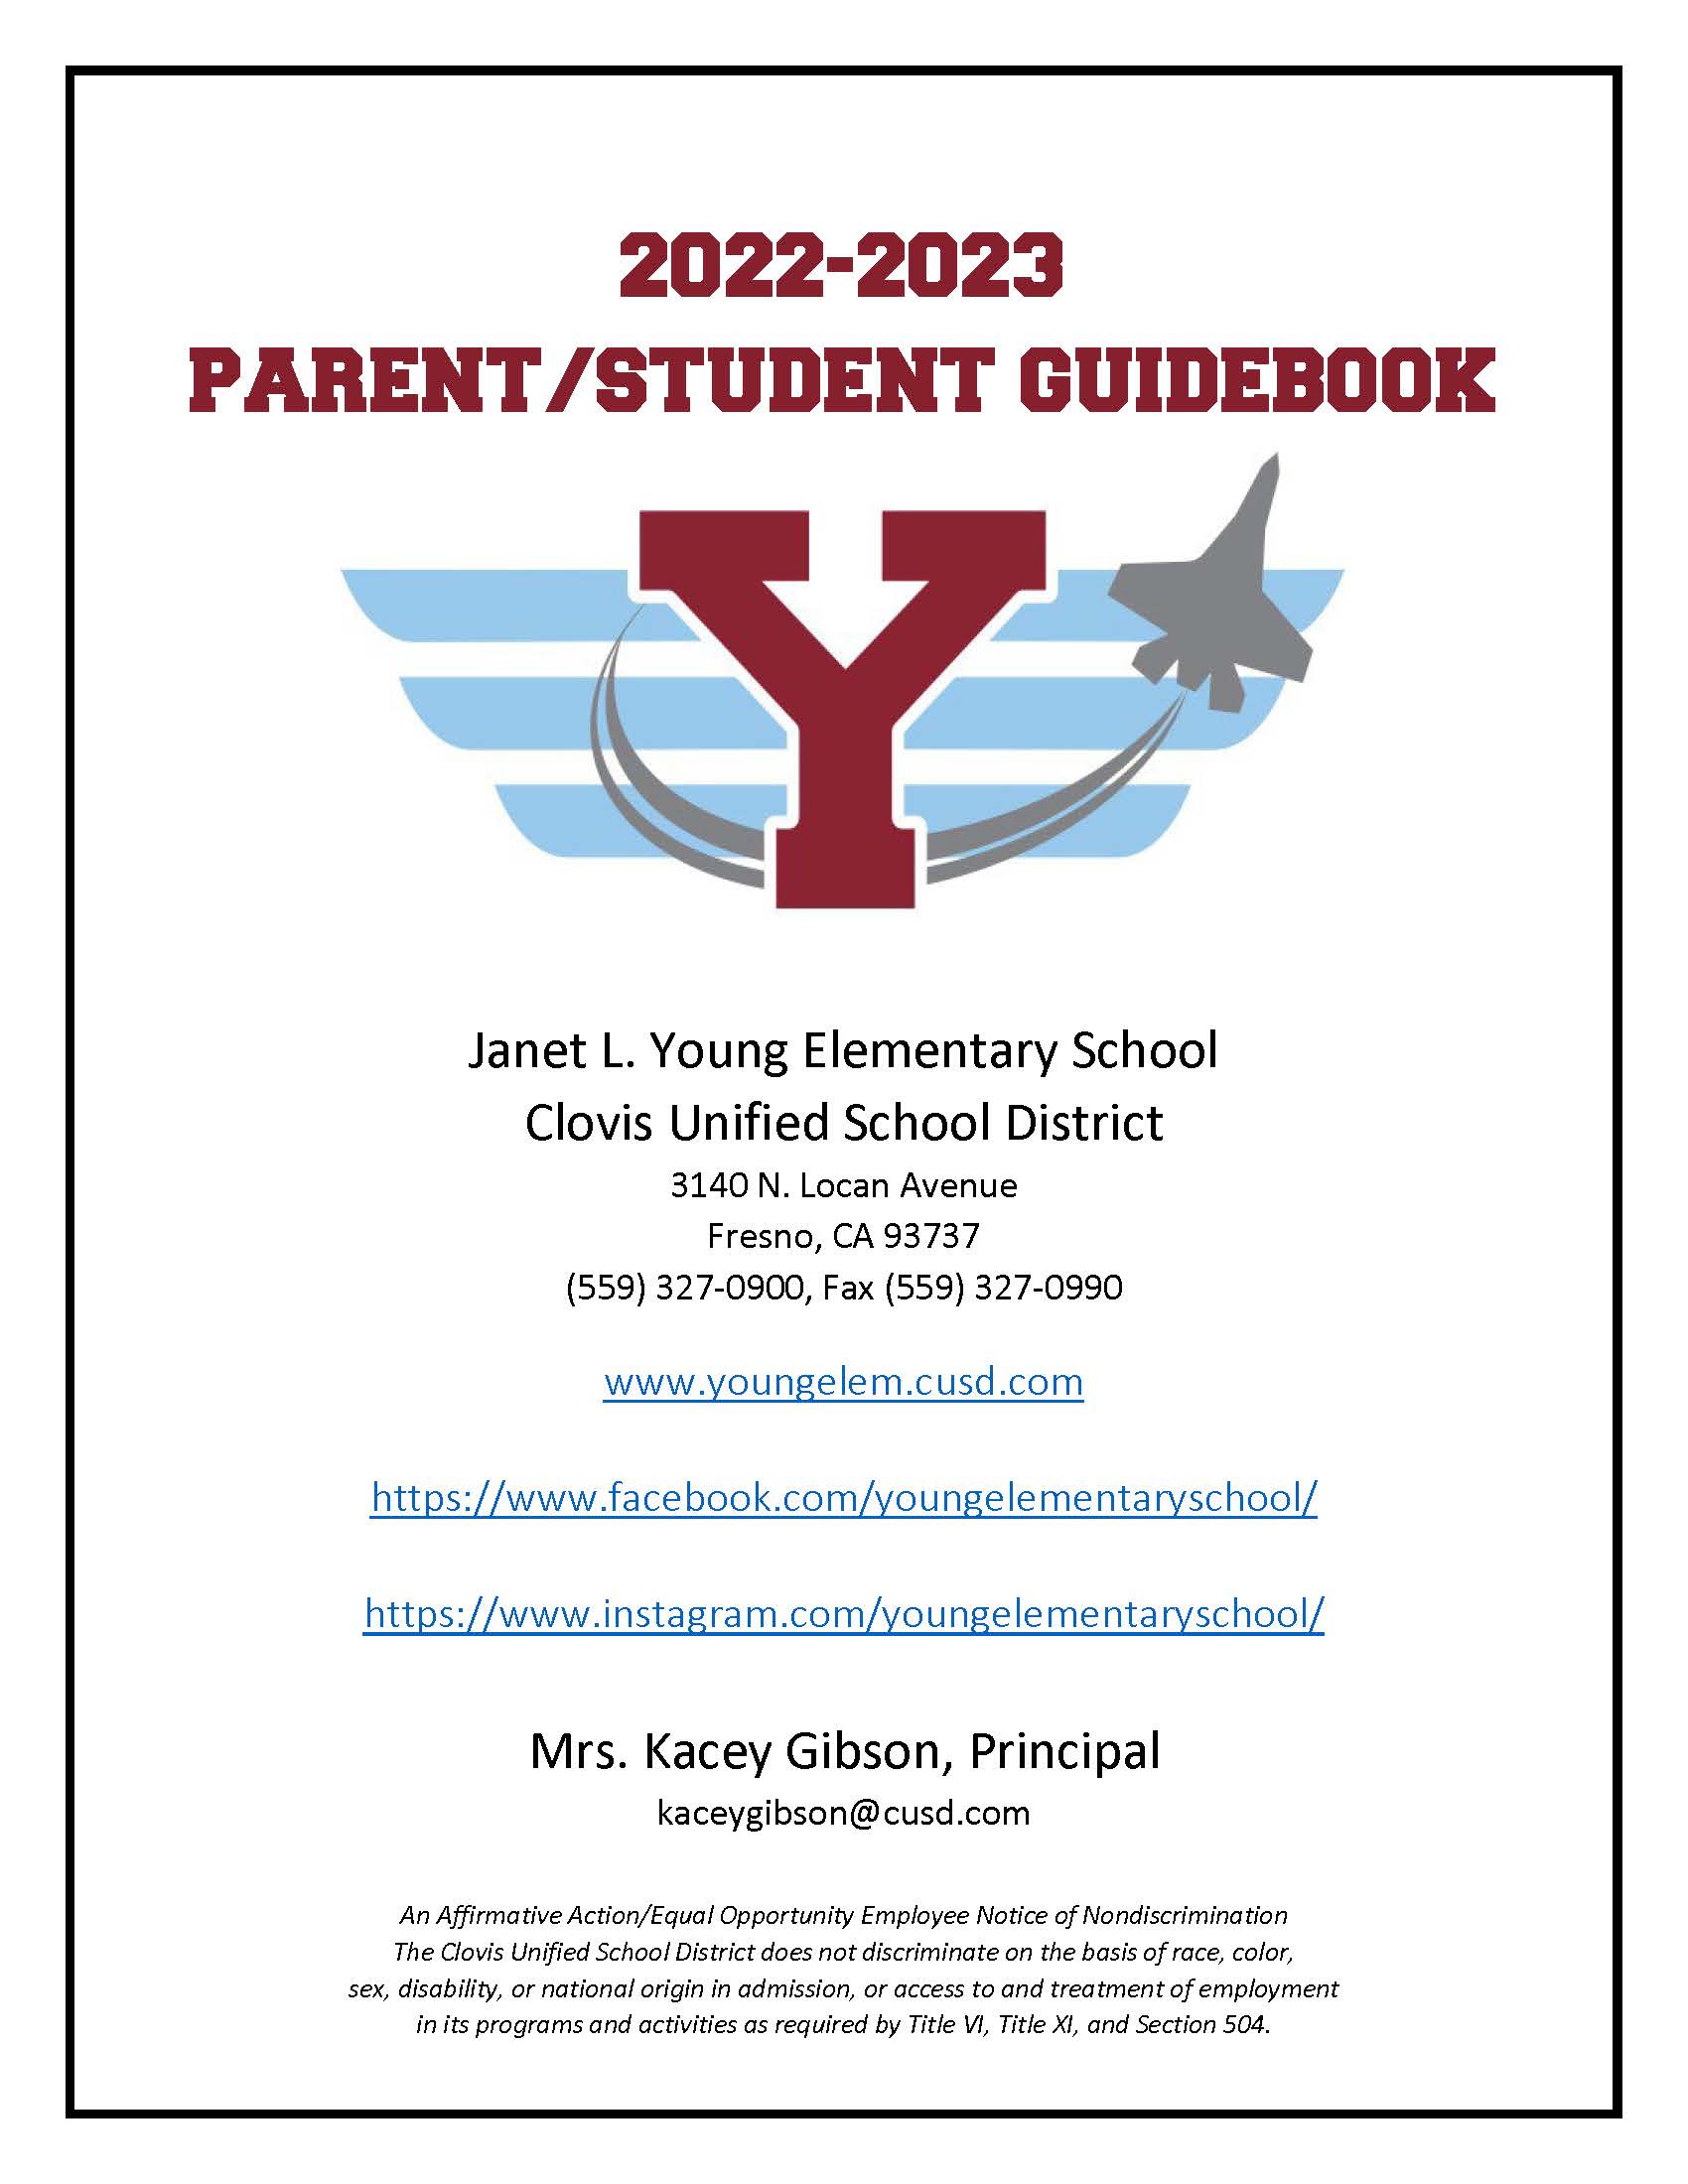 Image for: 2022-23 Parent-Student Guidebook